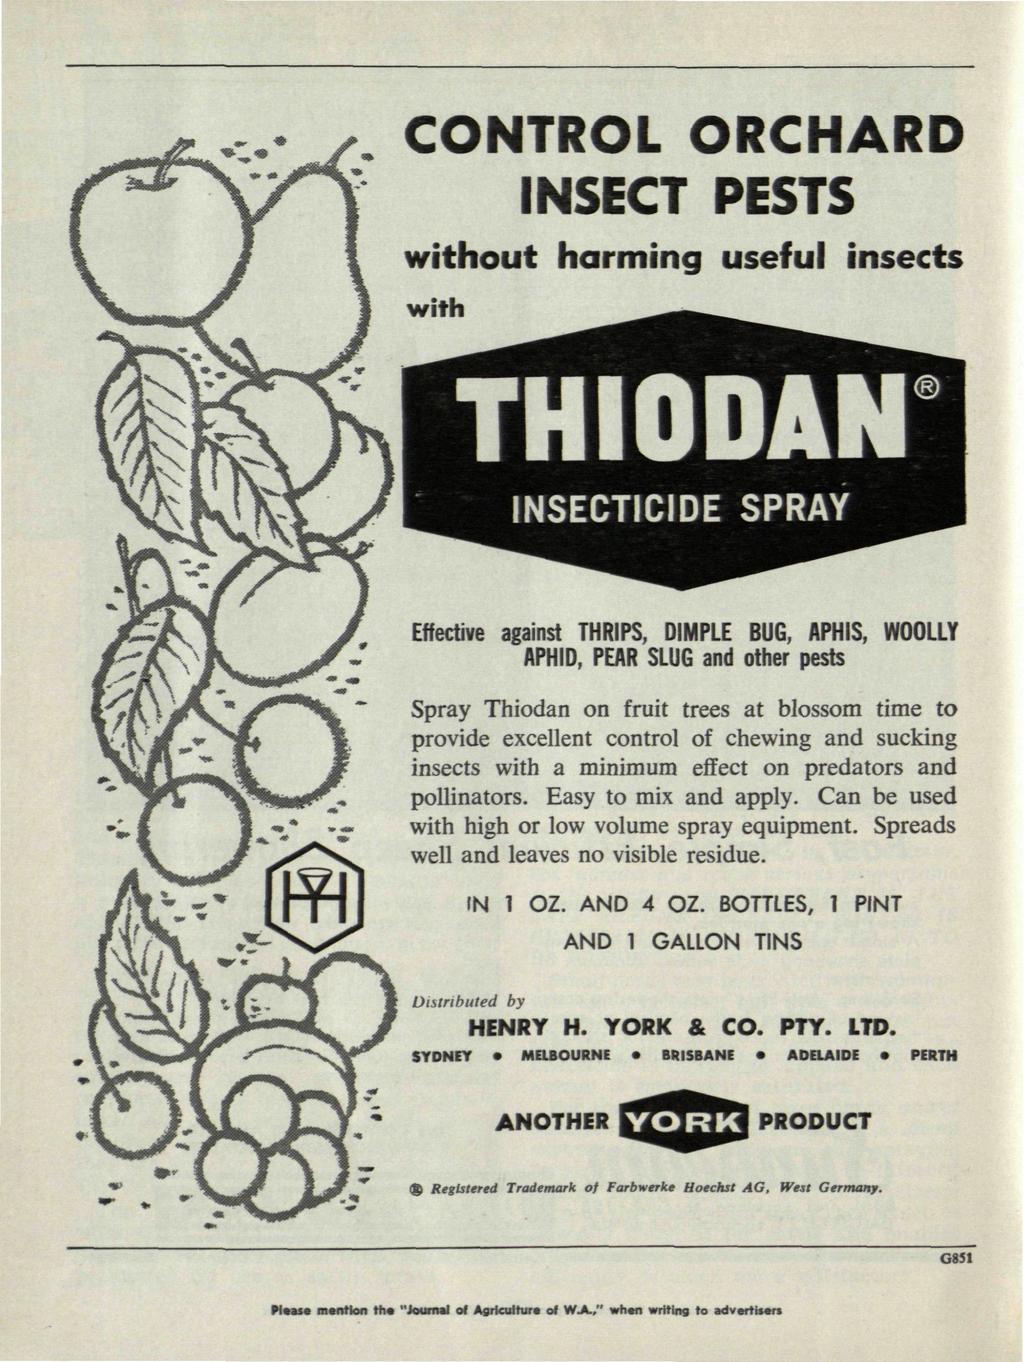 CONTROL ORCHARD INSECT PESTS without harming useful insects with THIODAN INSECTICIDE SPRAY Effective against THRIPS, DIMPLE BUG, APHIS, WOOLLY APHID, PEAR SLUG and other pests Spray Thiodan on fruit